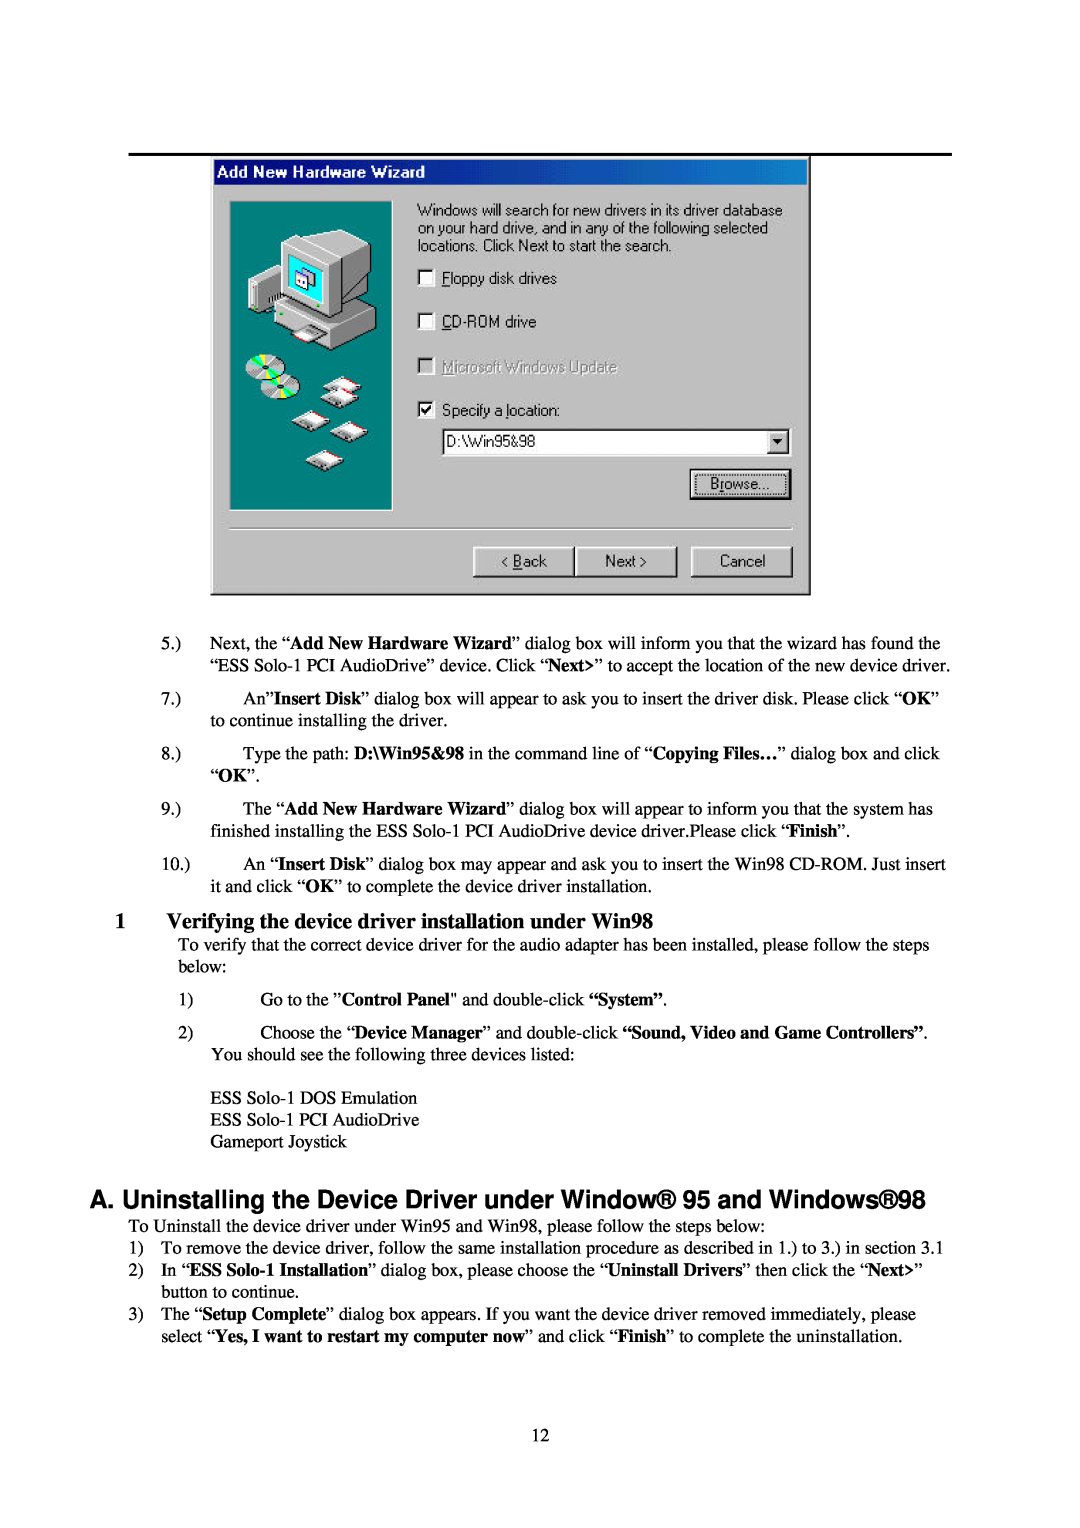 IBM L70 manual A. Uninstalling the Device Driver under Window 95 and Windows98 